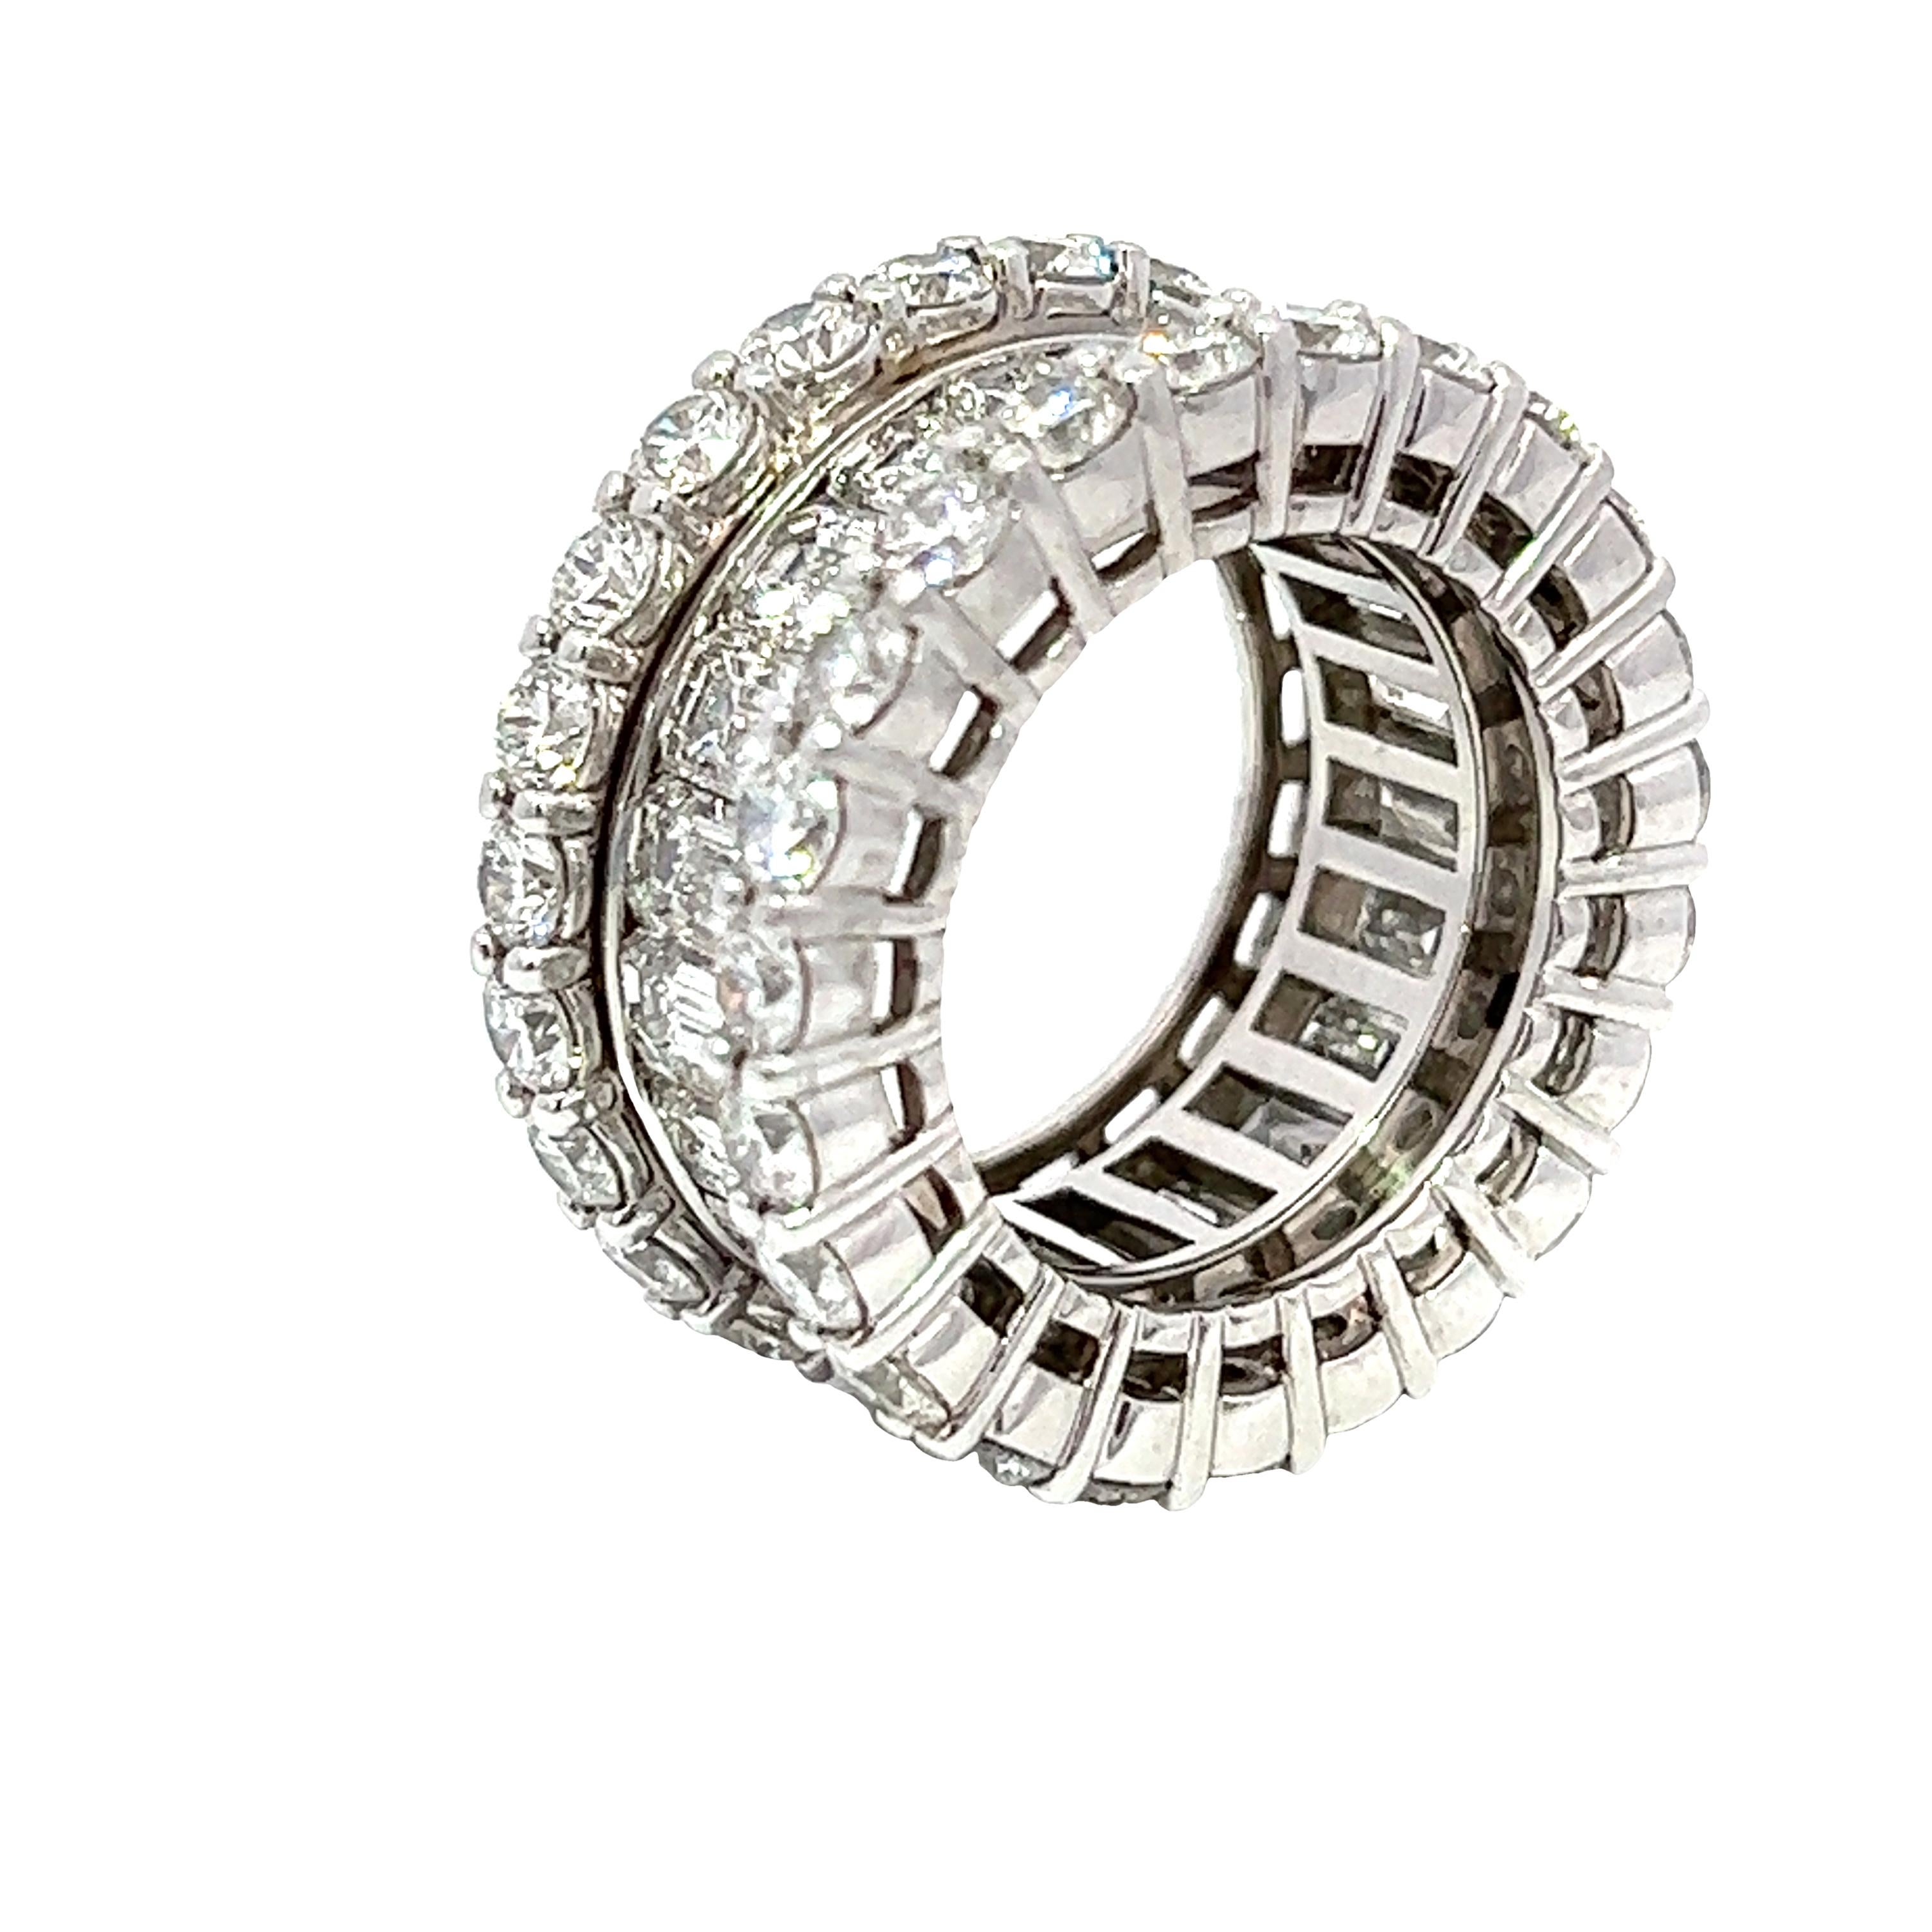 We present our meticulously crafted diamond eternity ring, the epitome of elegance and sophistication that defines luxury. This ring weighs 19.37 Grams and carries 5.50CT of Round Diamonds, F-G Color, and VS clarity. Then, it follows with 7.10CT in